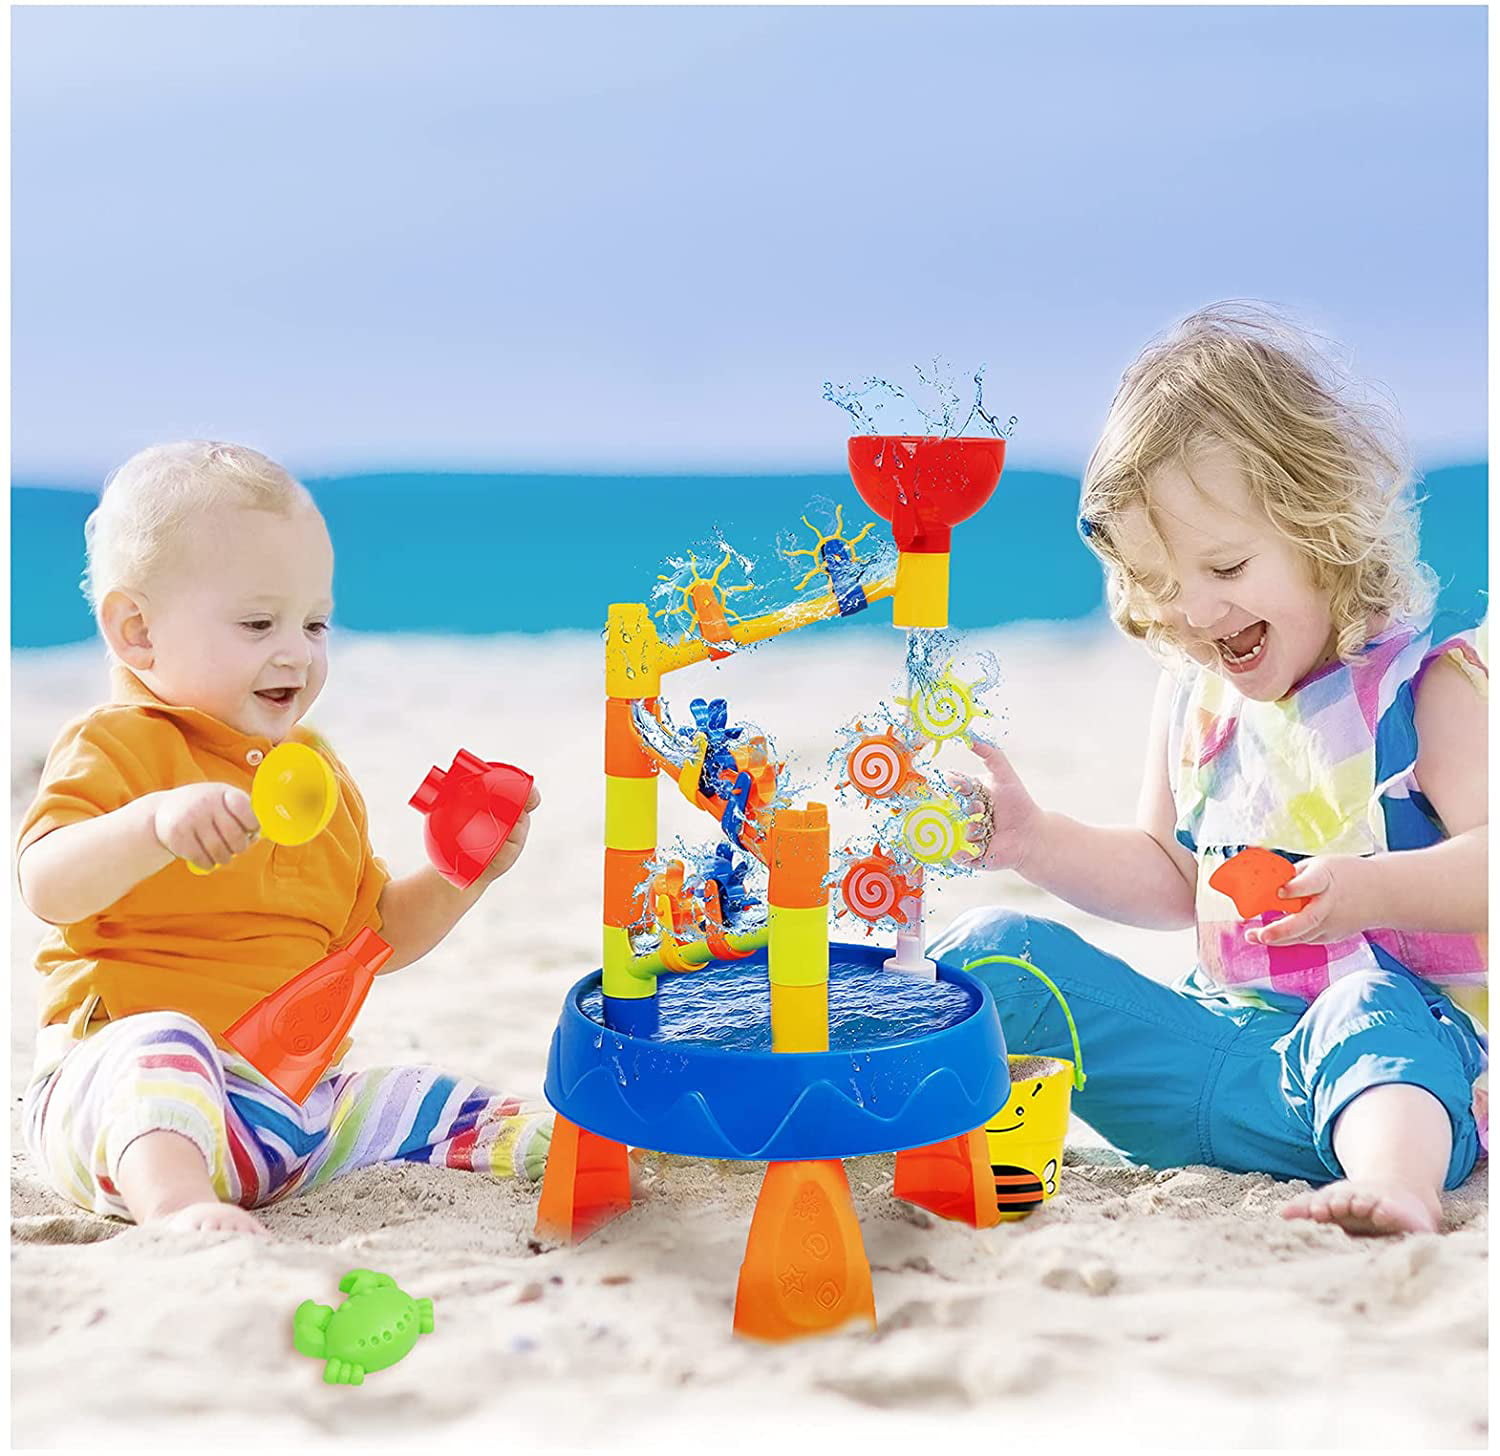 Details about   Sand Water Play Table Crab Shell Cover Lid Sandbox Toys Accessory Set Kids Gift